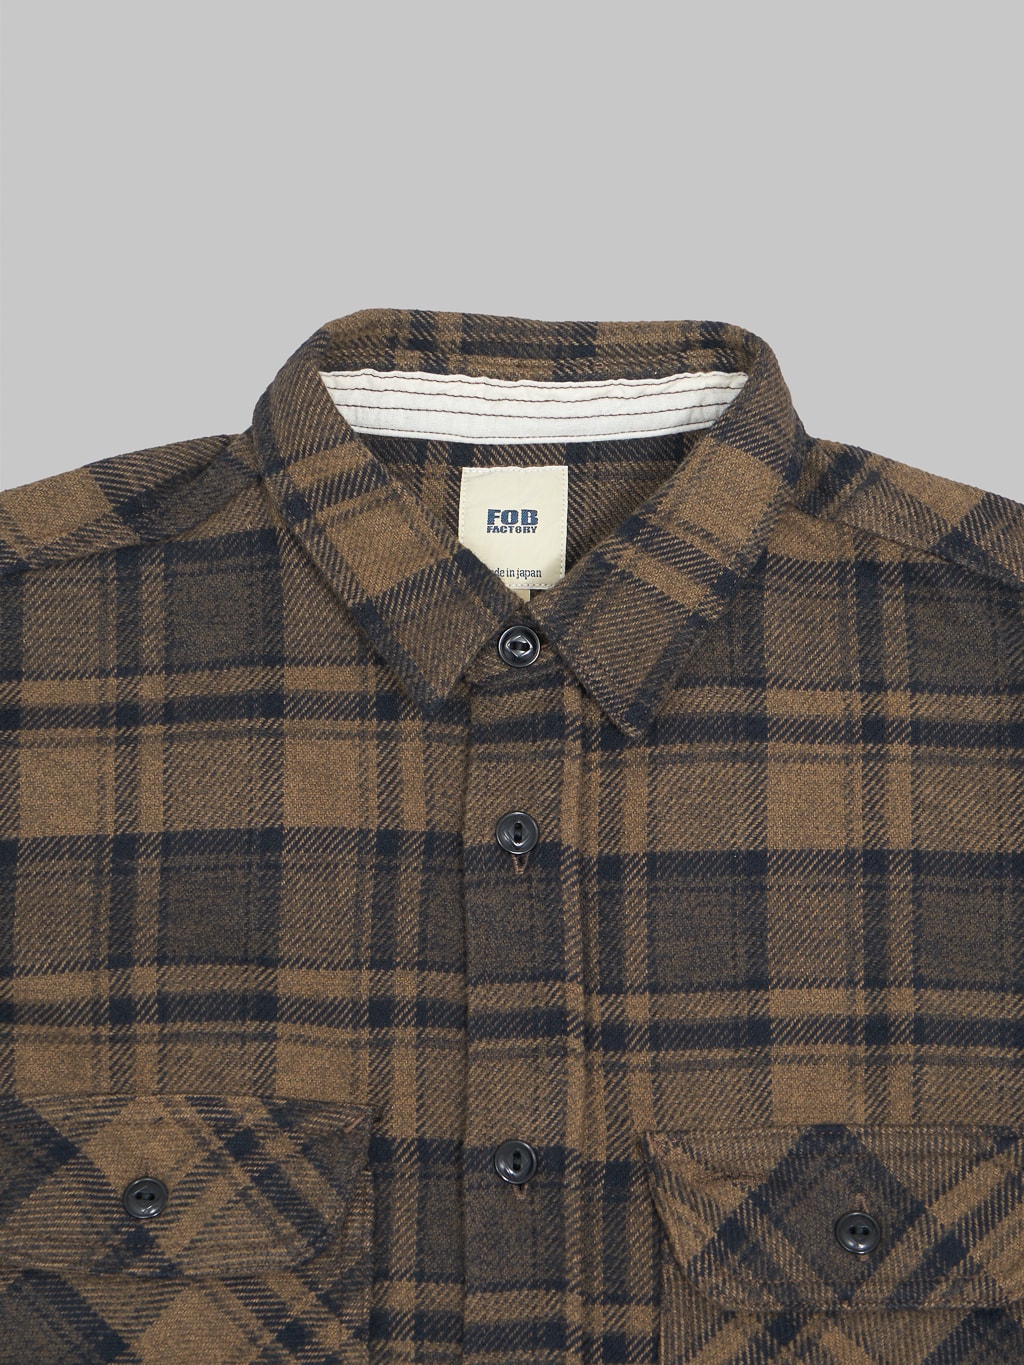 Fob Factory F3497 Nel Check Work flannel Shirt Brown collar